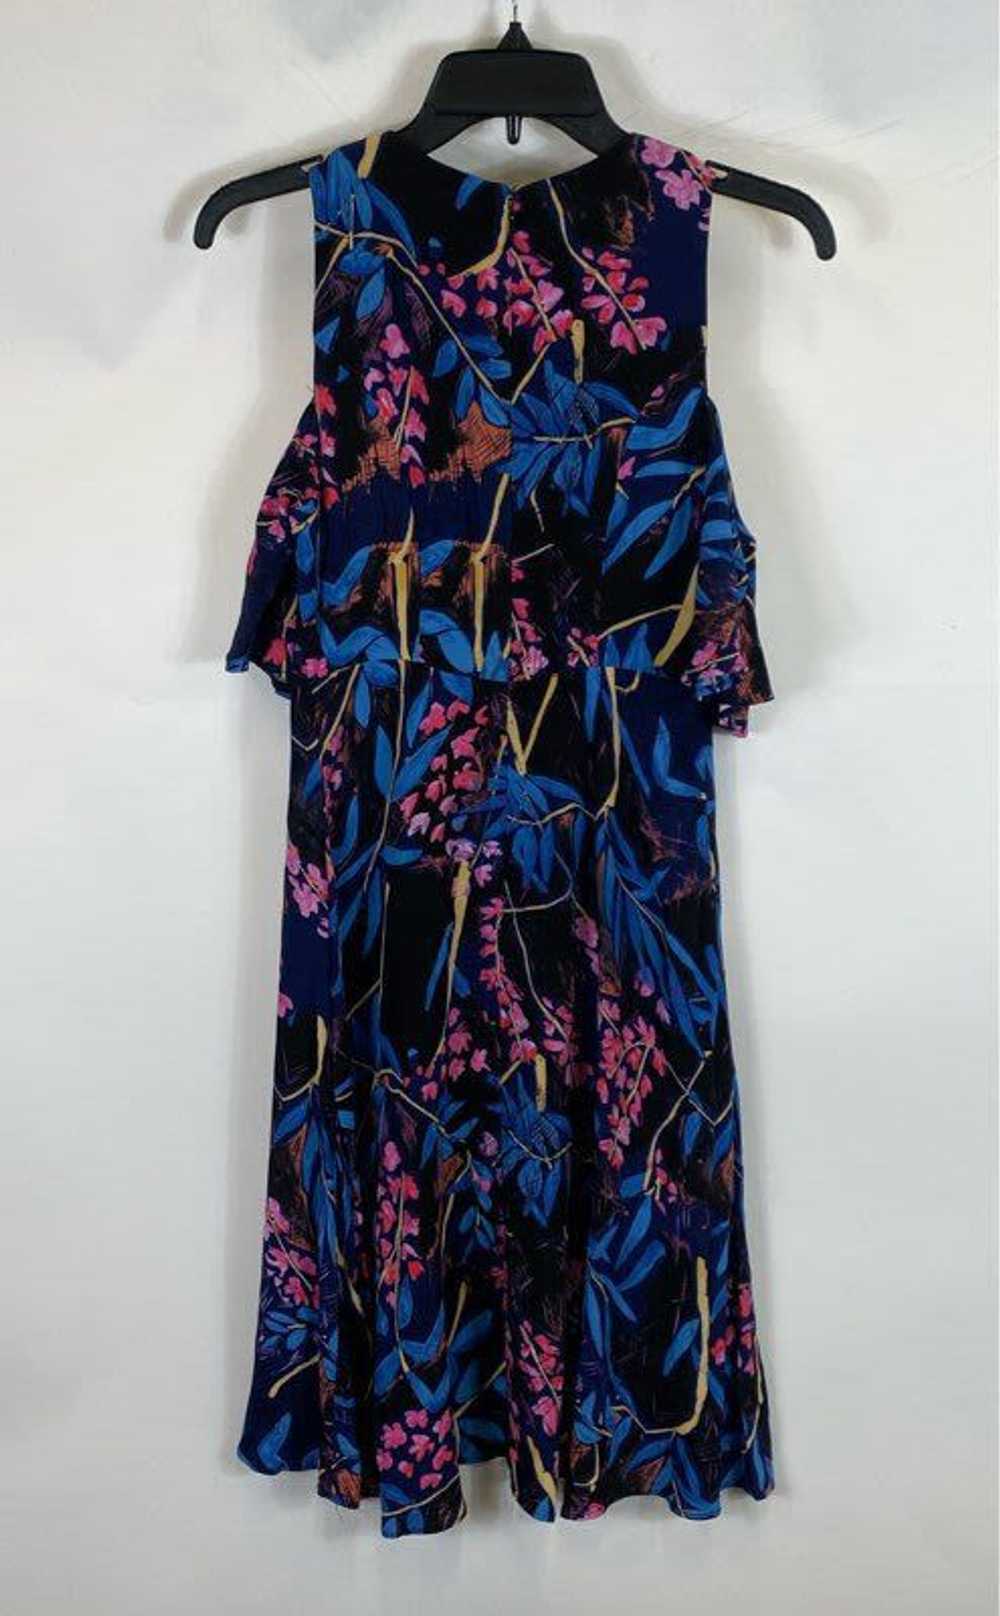 Anthropologie X Maeve Floral Maxi Dress - Size 0 - image 5